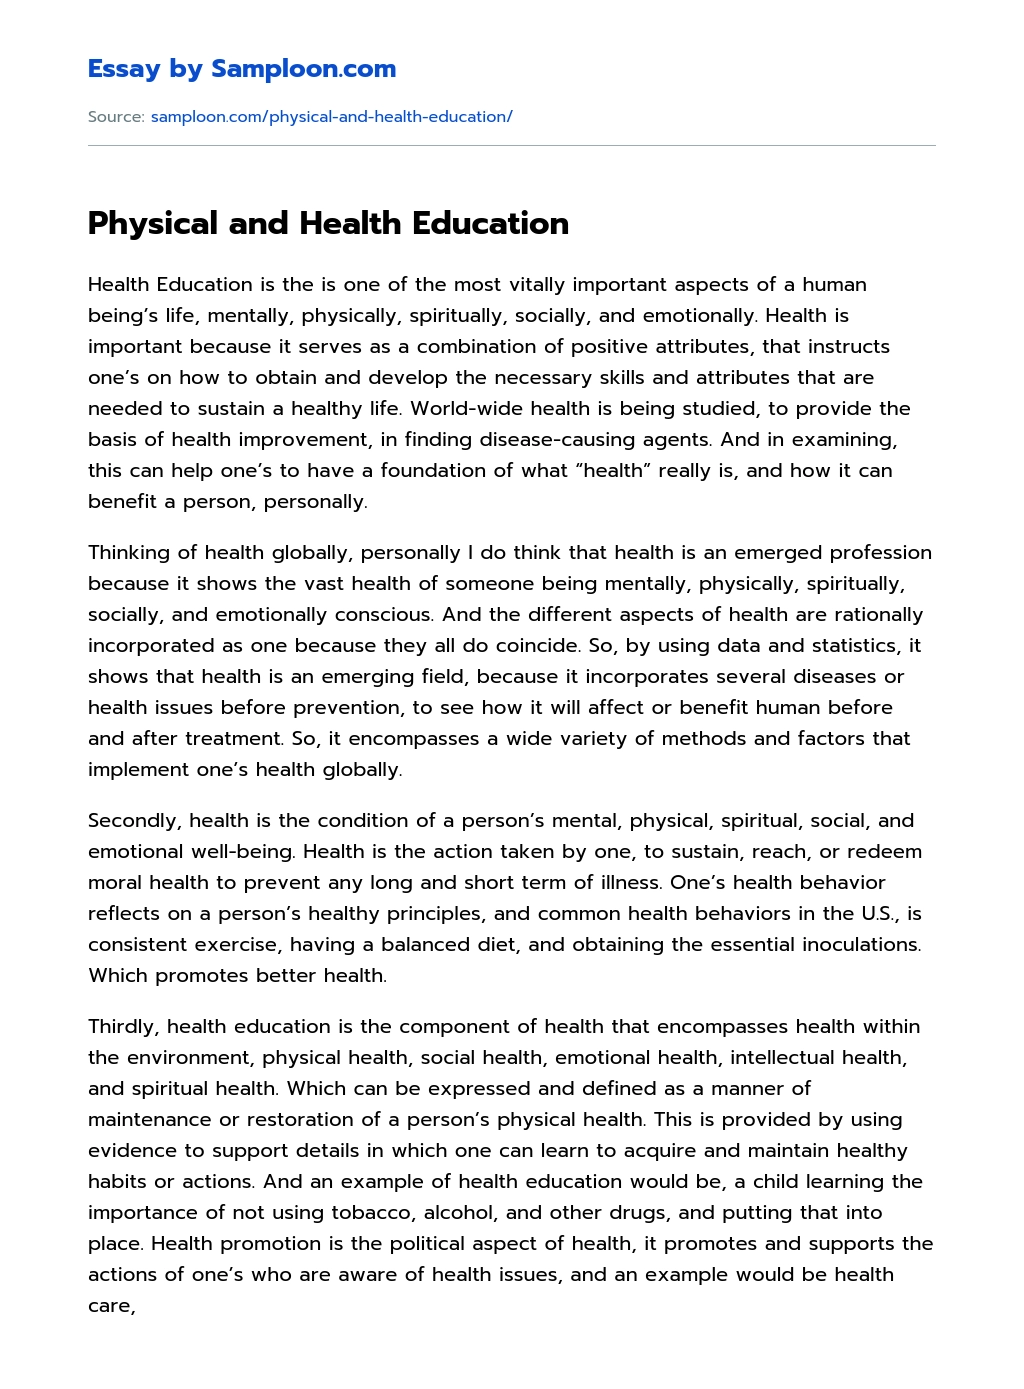 Physical and Health Education essay